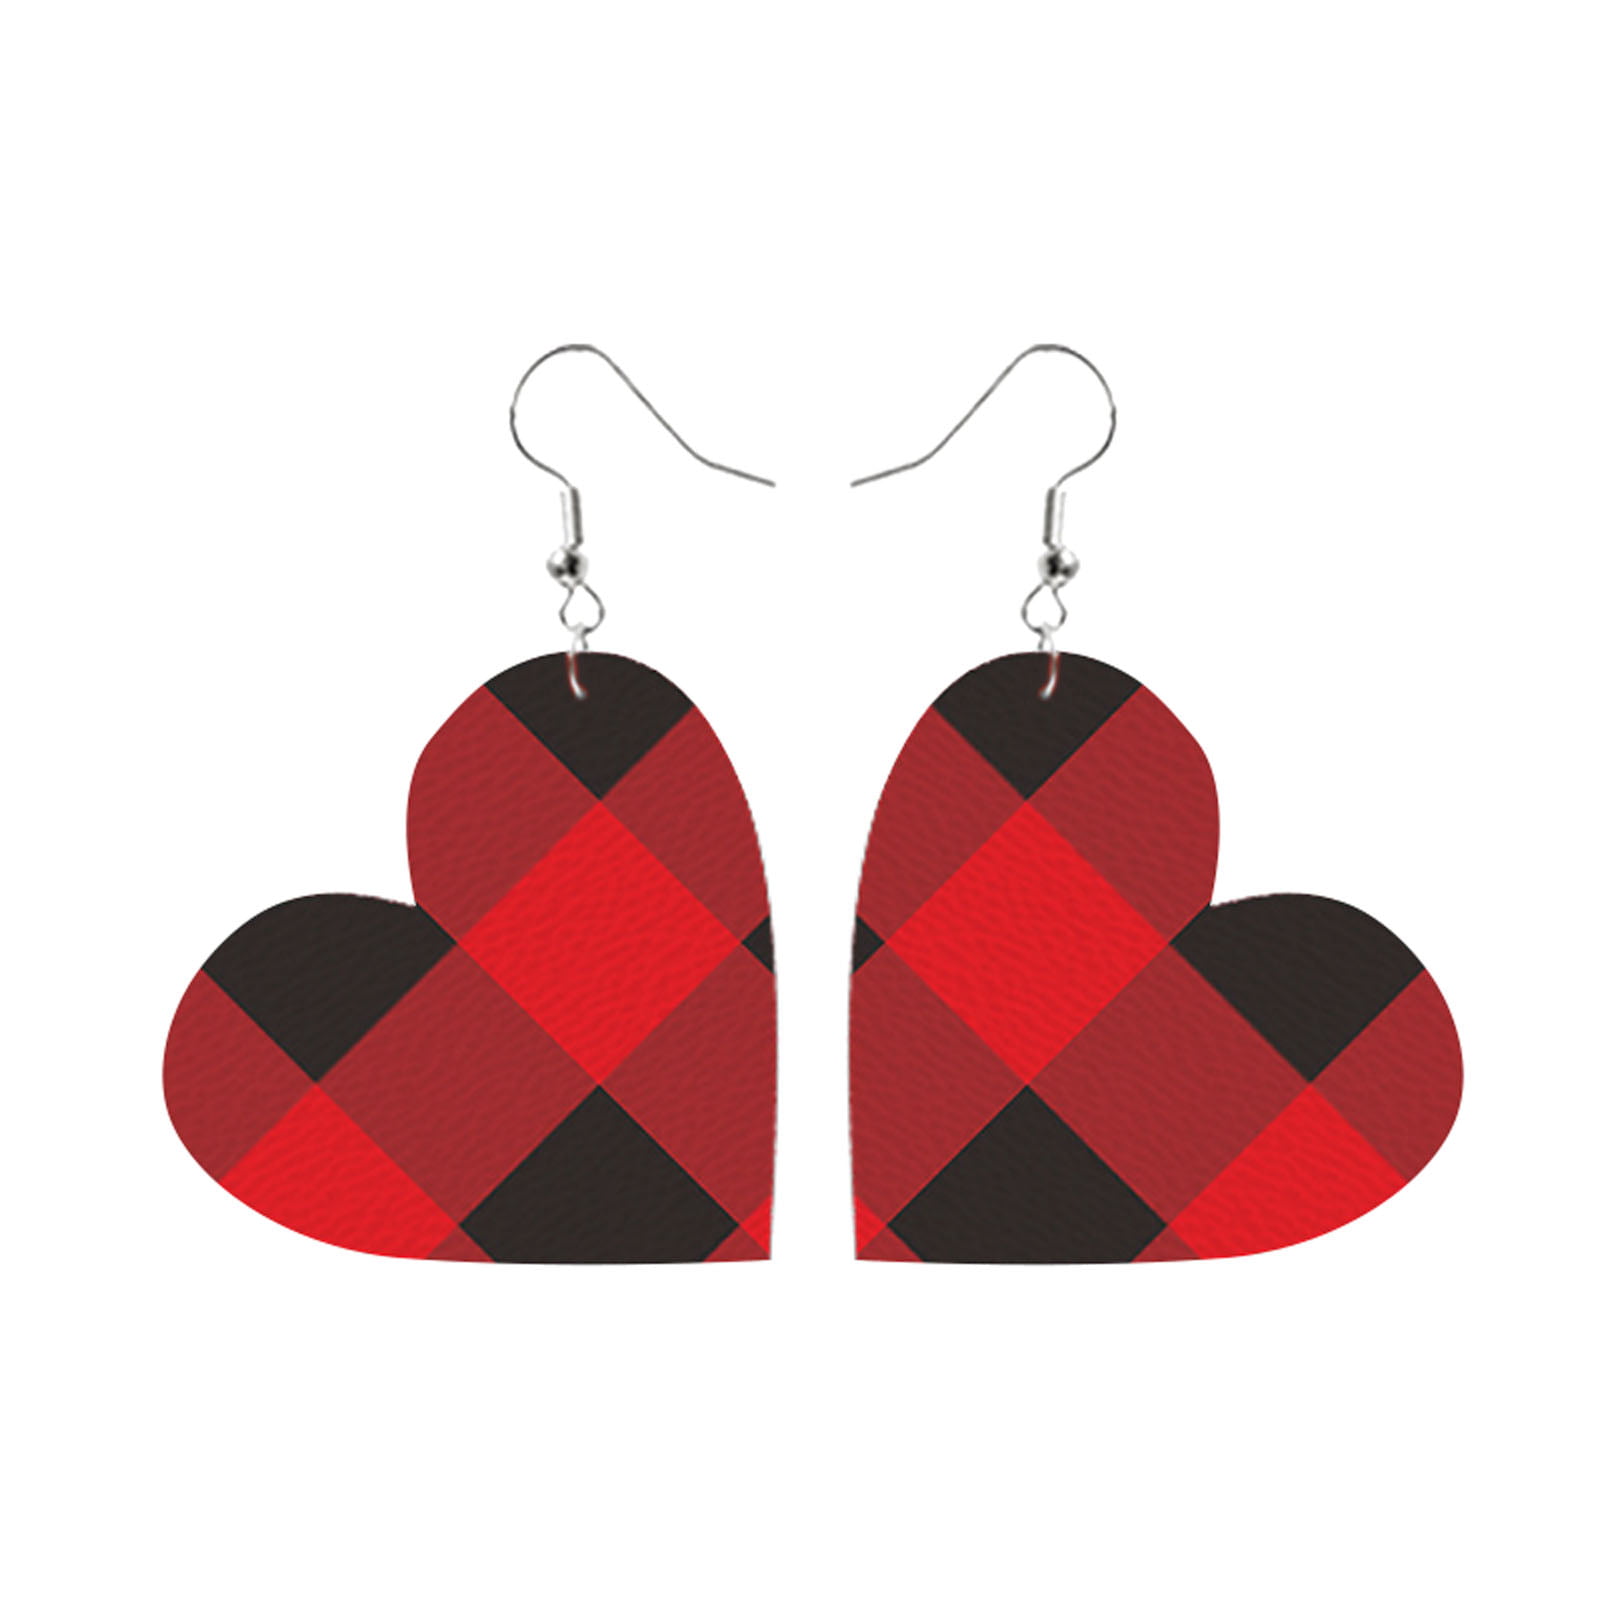 Bow Earrings Valentine's Day Leather Earrings Red And Black Check Tie Dye  Leopard Print Heart Leather Earrings Drop Shaped Gift For Girls Vintage  Jewelry - Walmart.com